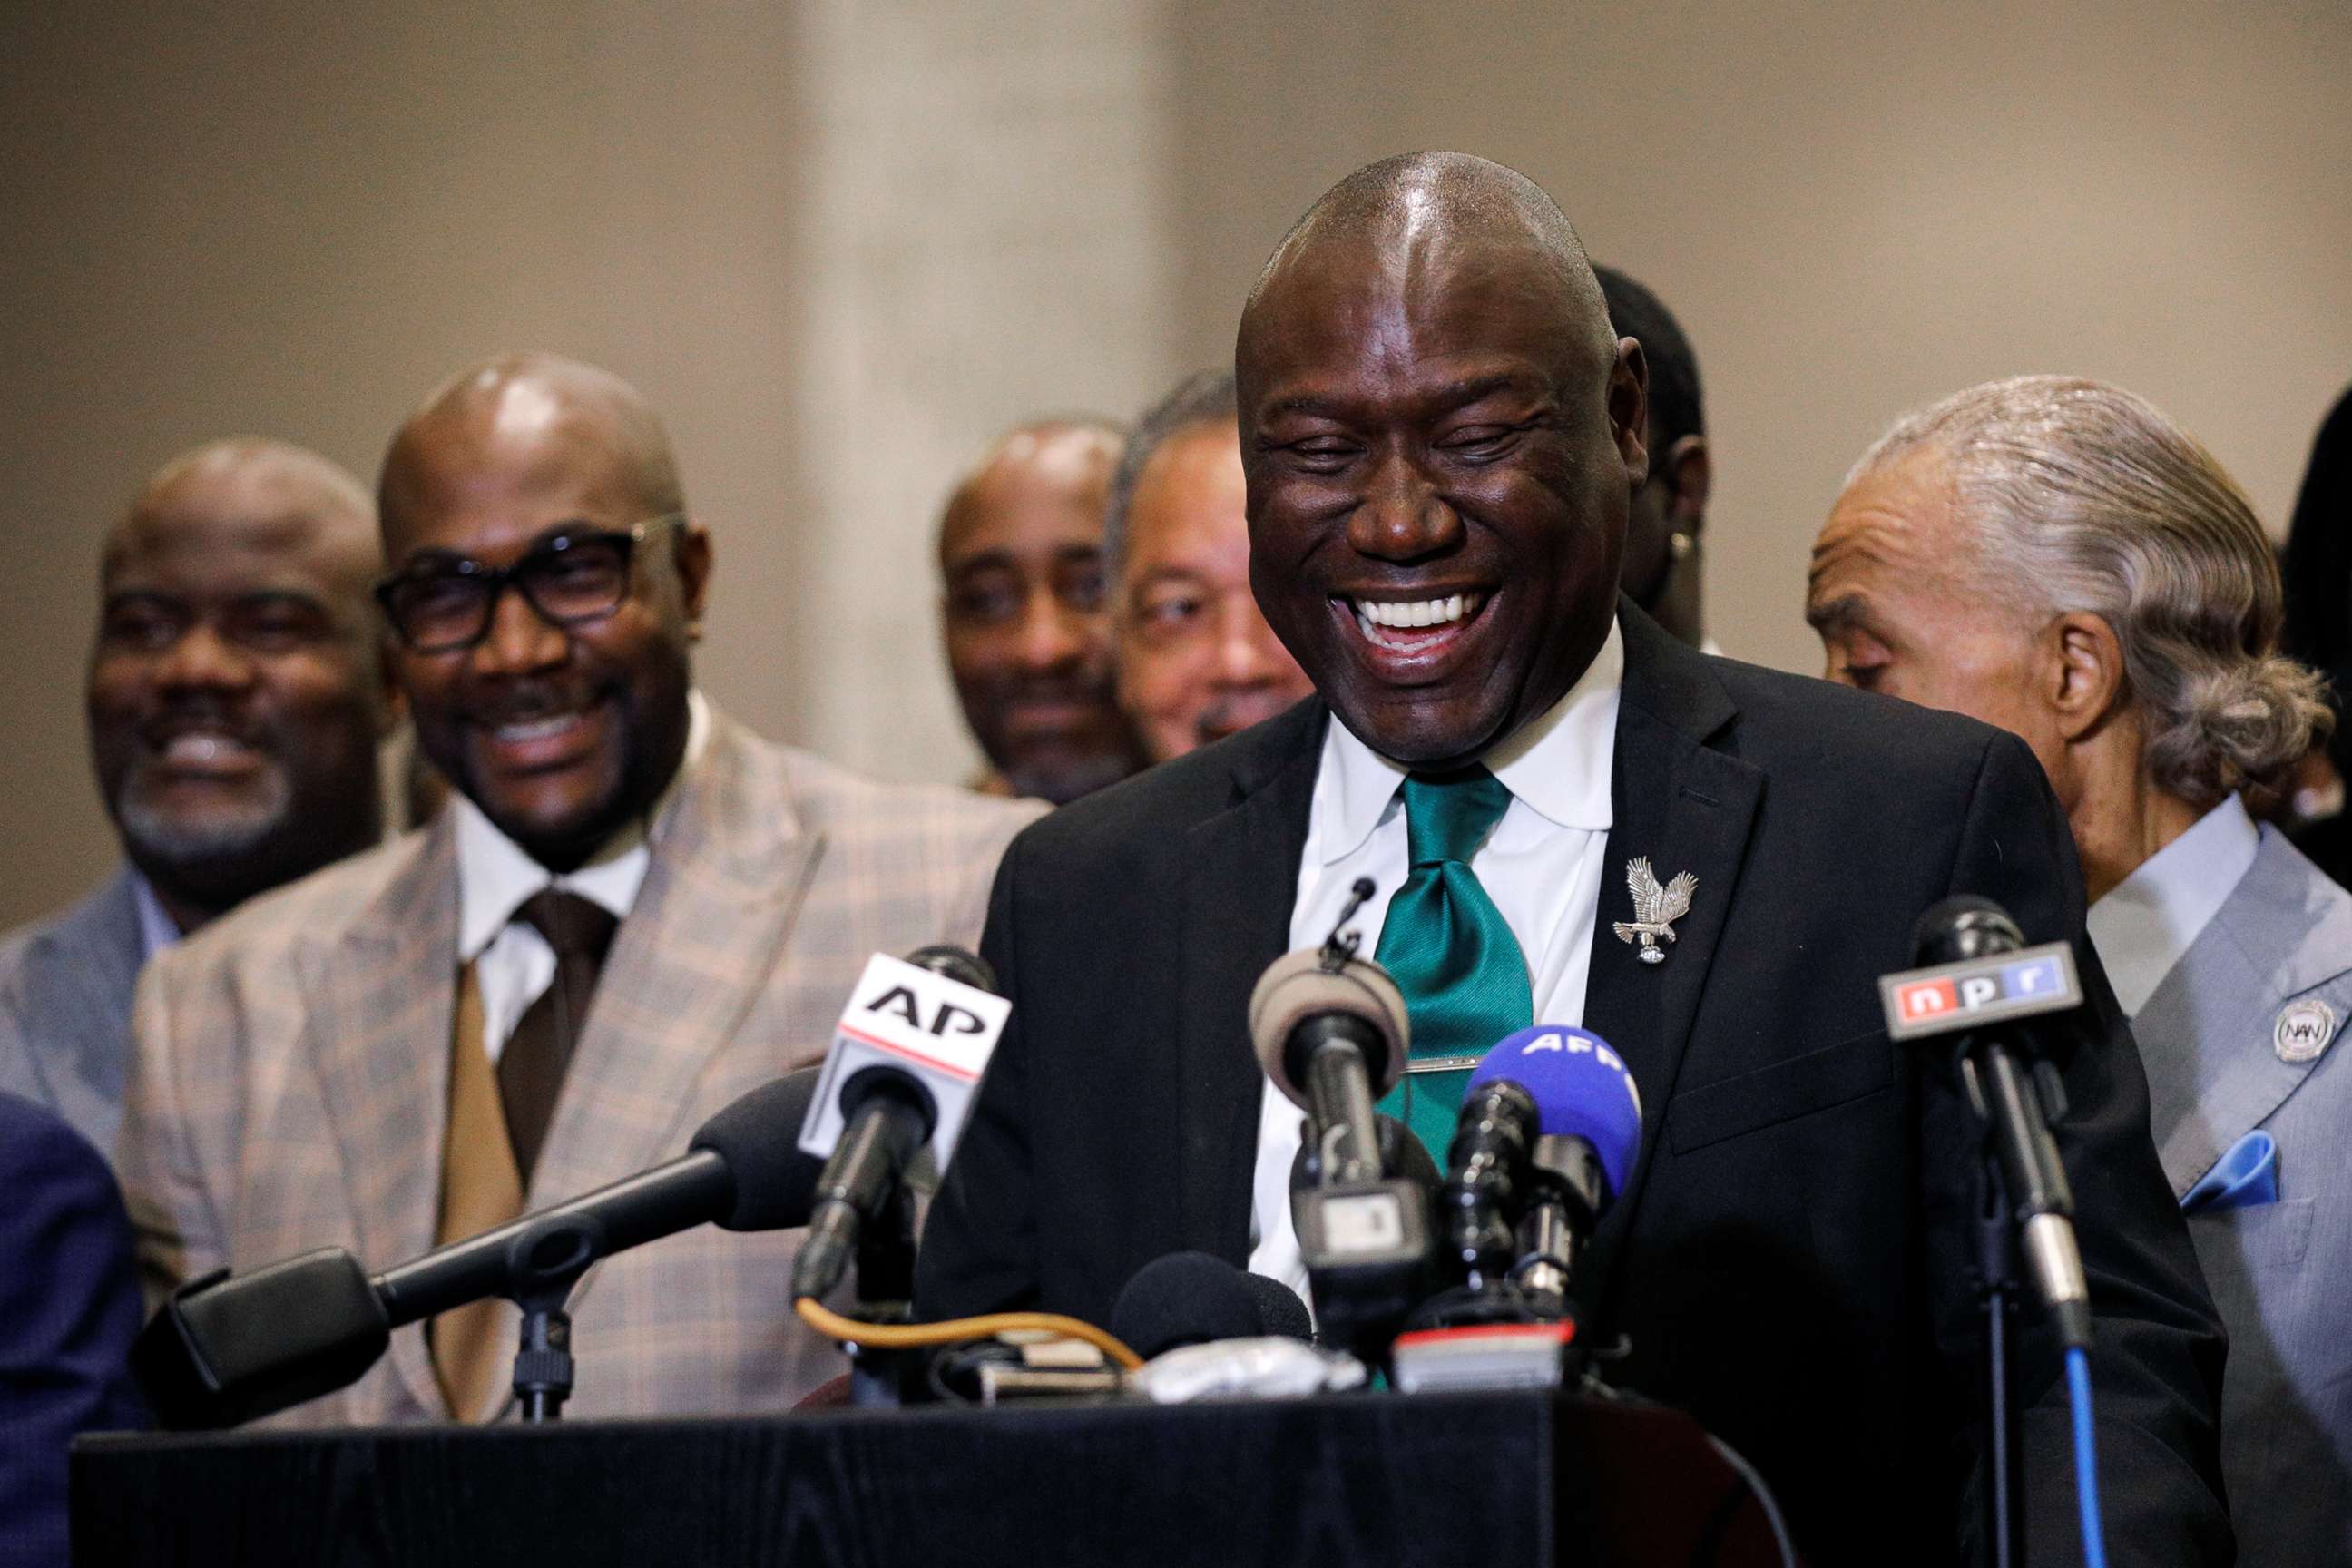 PHOTO: Floyd family attorney Ben Crump reacts as he speaks during a news conference following the verdict in the trial of former Minneapolis police officer Derek Chauvin, found guilty of the death of George Floyd, in Minneapolis, April 20, 2021.